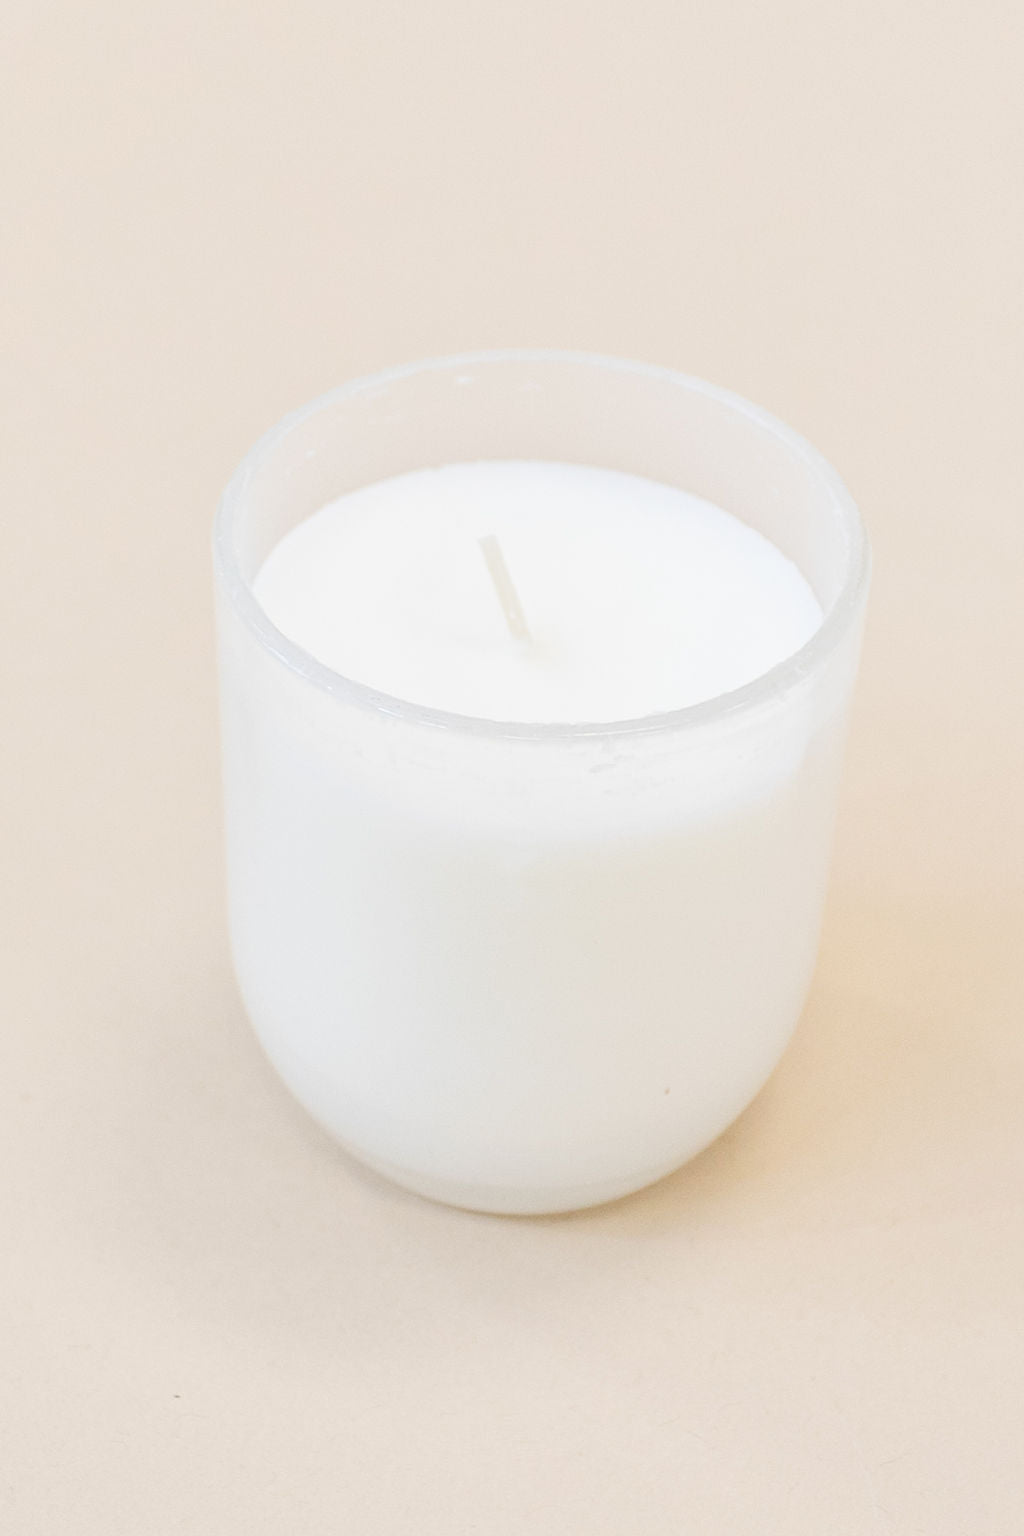 Paddywax | Enneagram Candle | The Peacemaker - Poppy and Stella